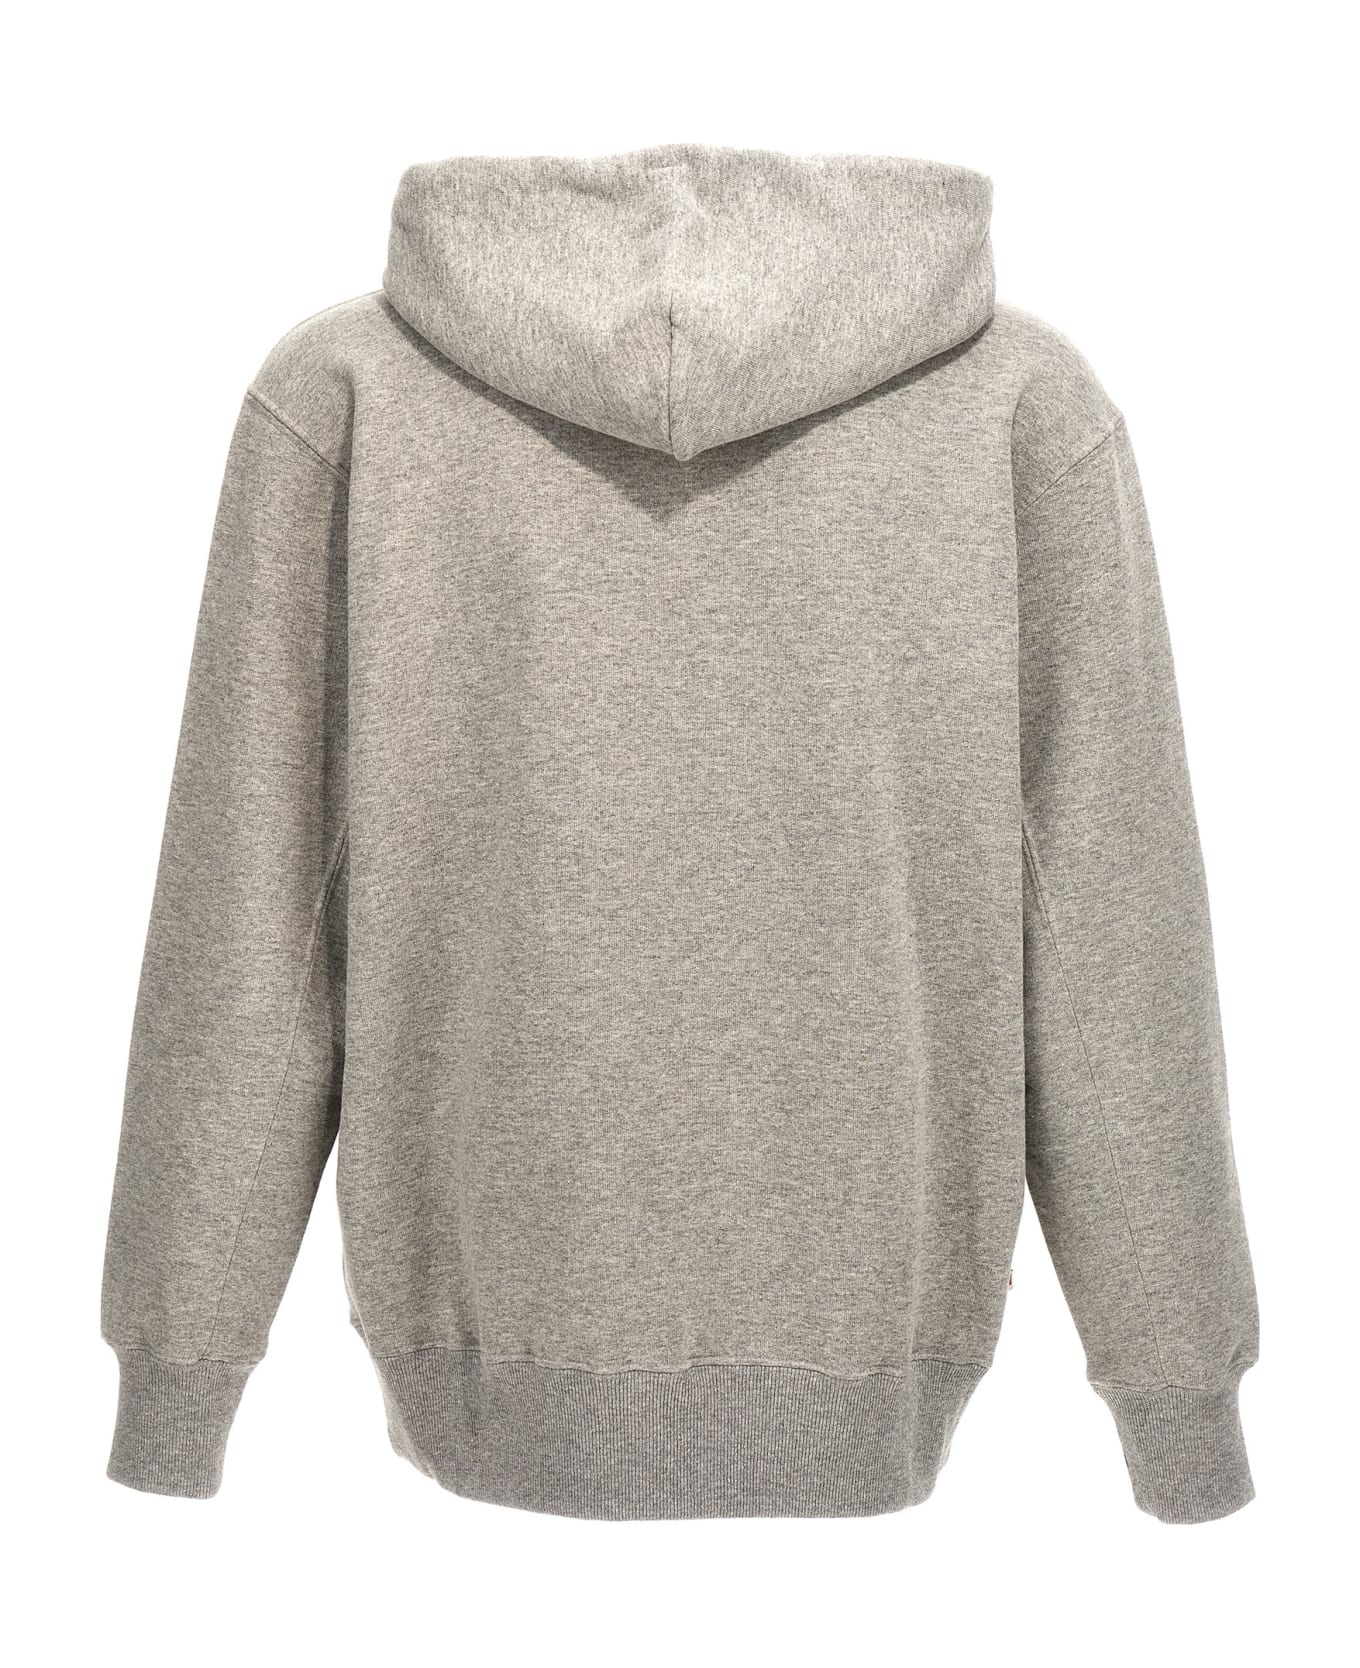 Autry Ease Hoodie - Gray